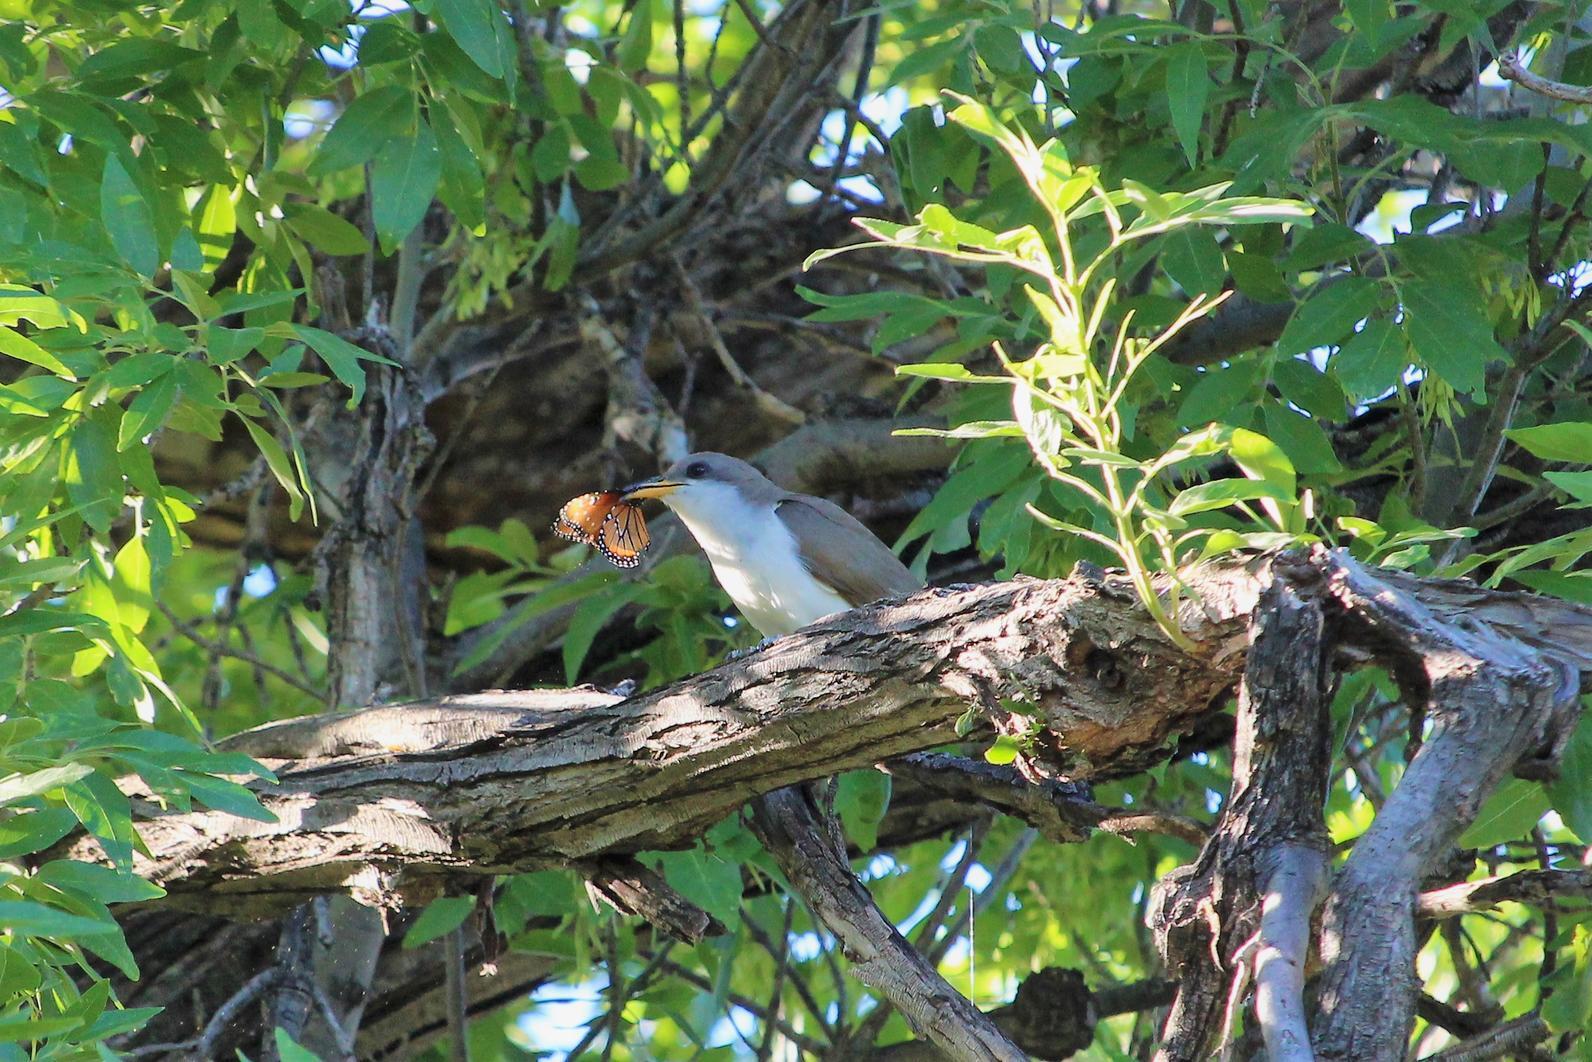 A Western Yellow-billed Cuckoo perches on a branch in a big leafy green tree with a Queen Butterfly in its beak.